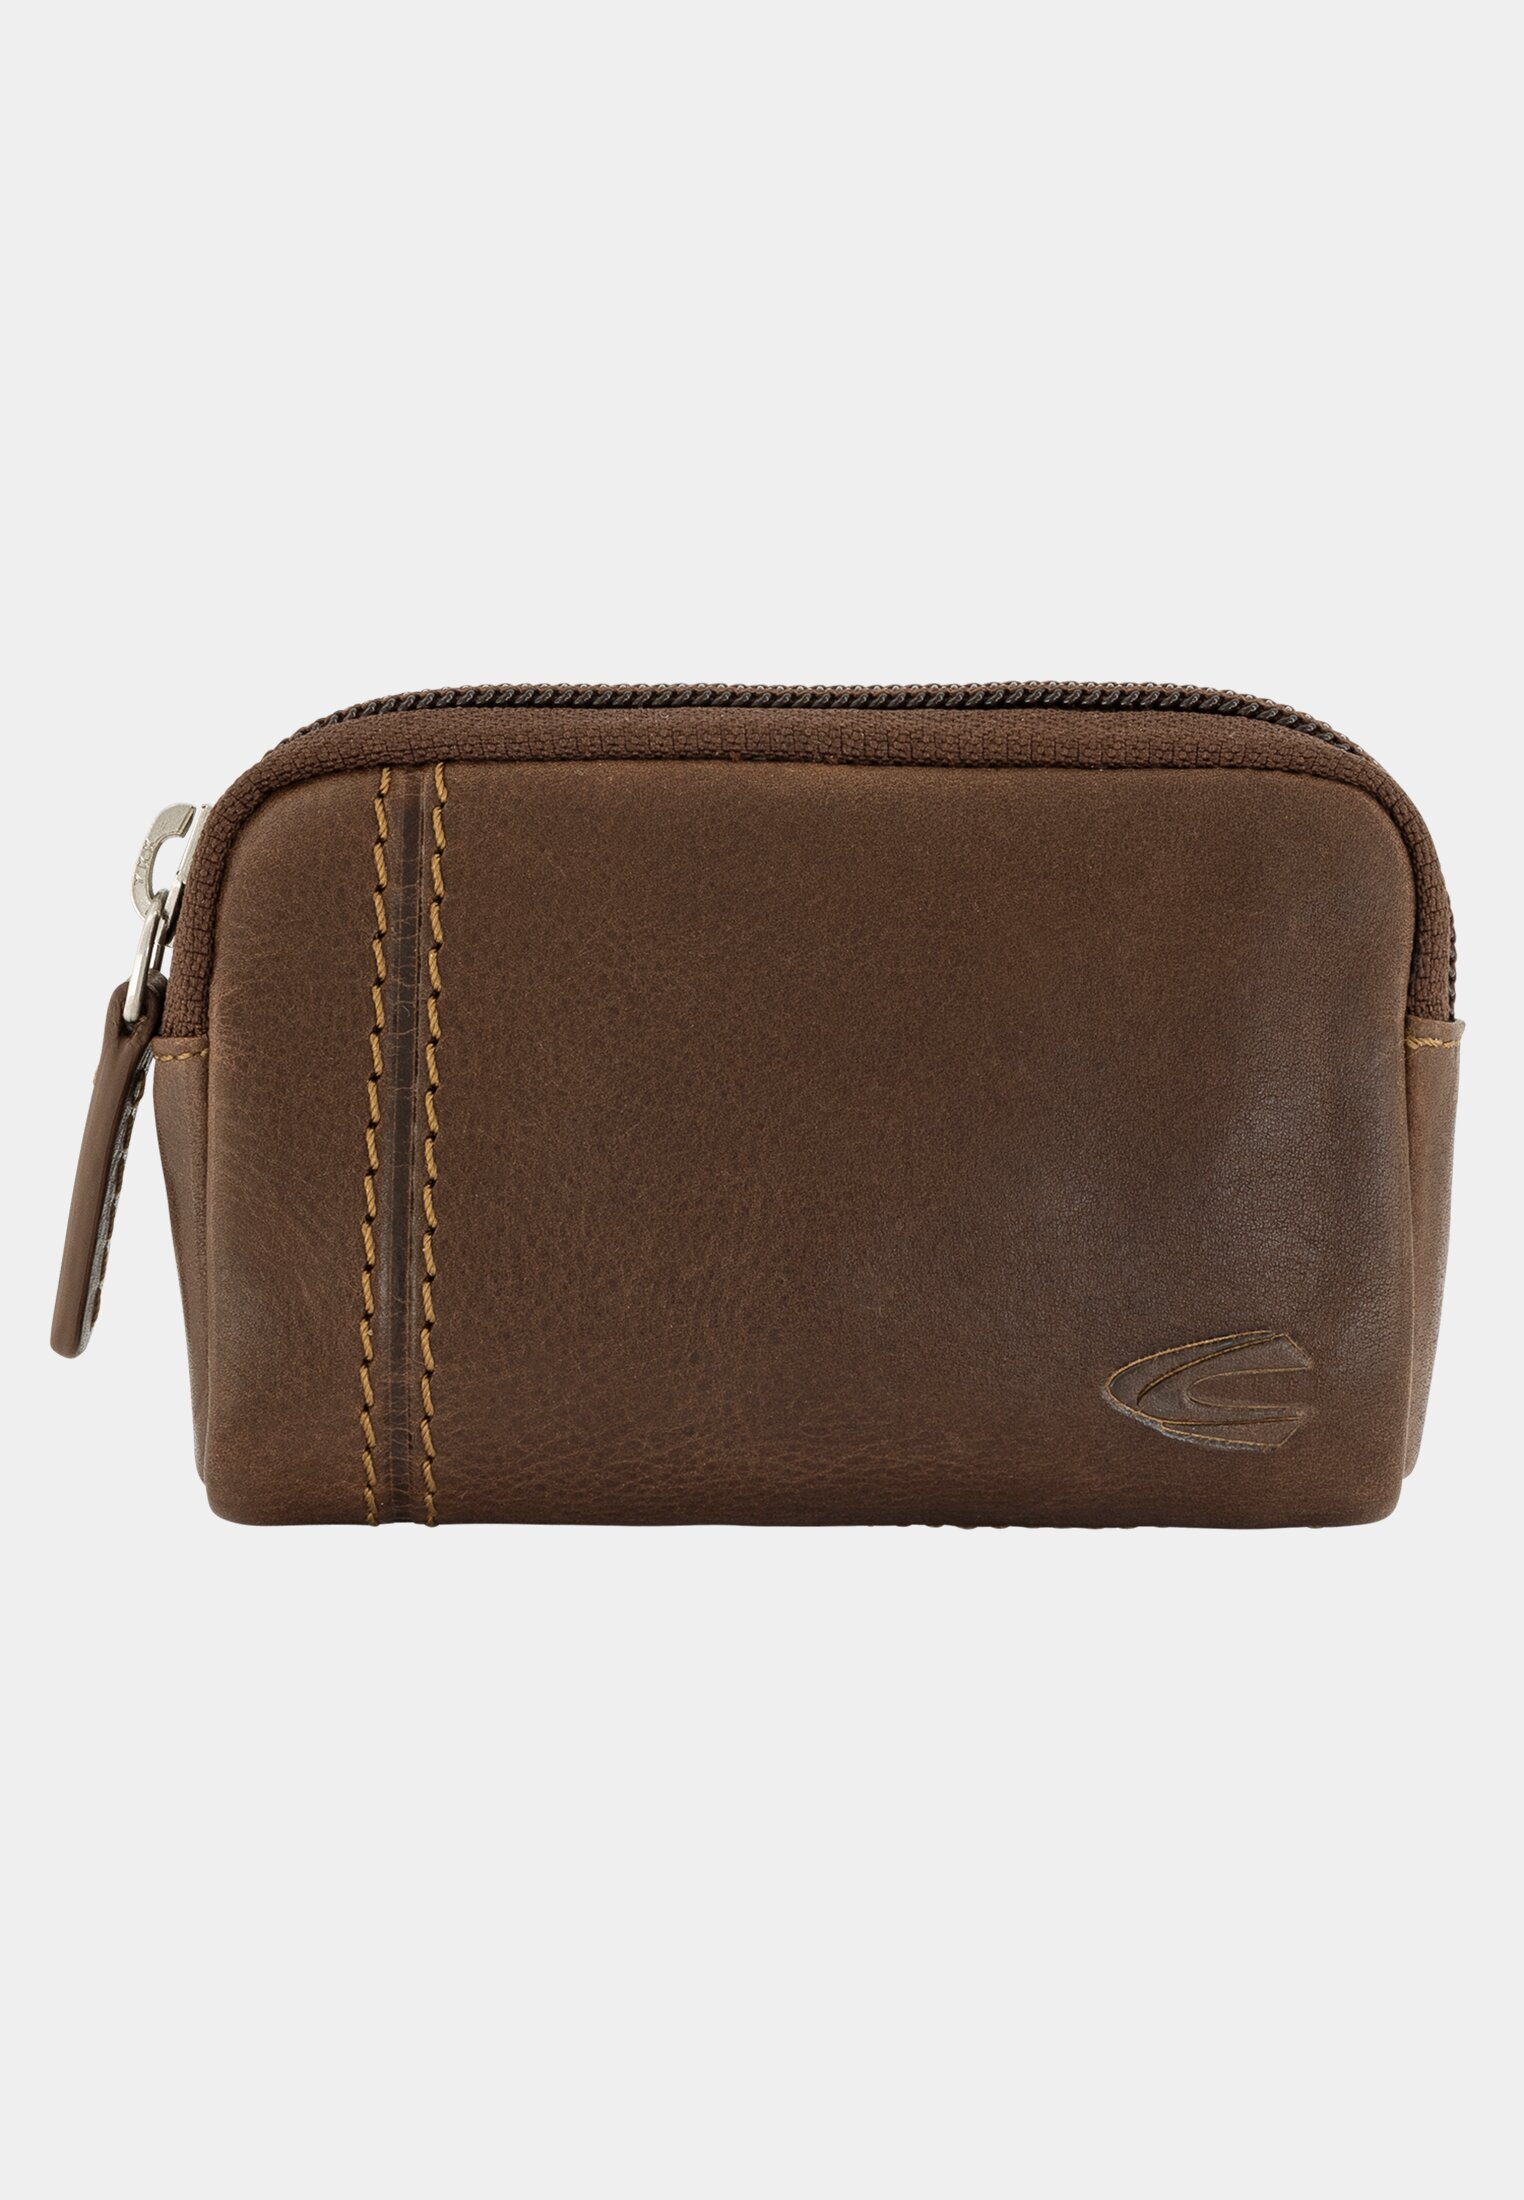 Camel Active Key case made from genuine leather